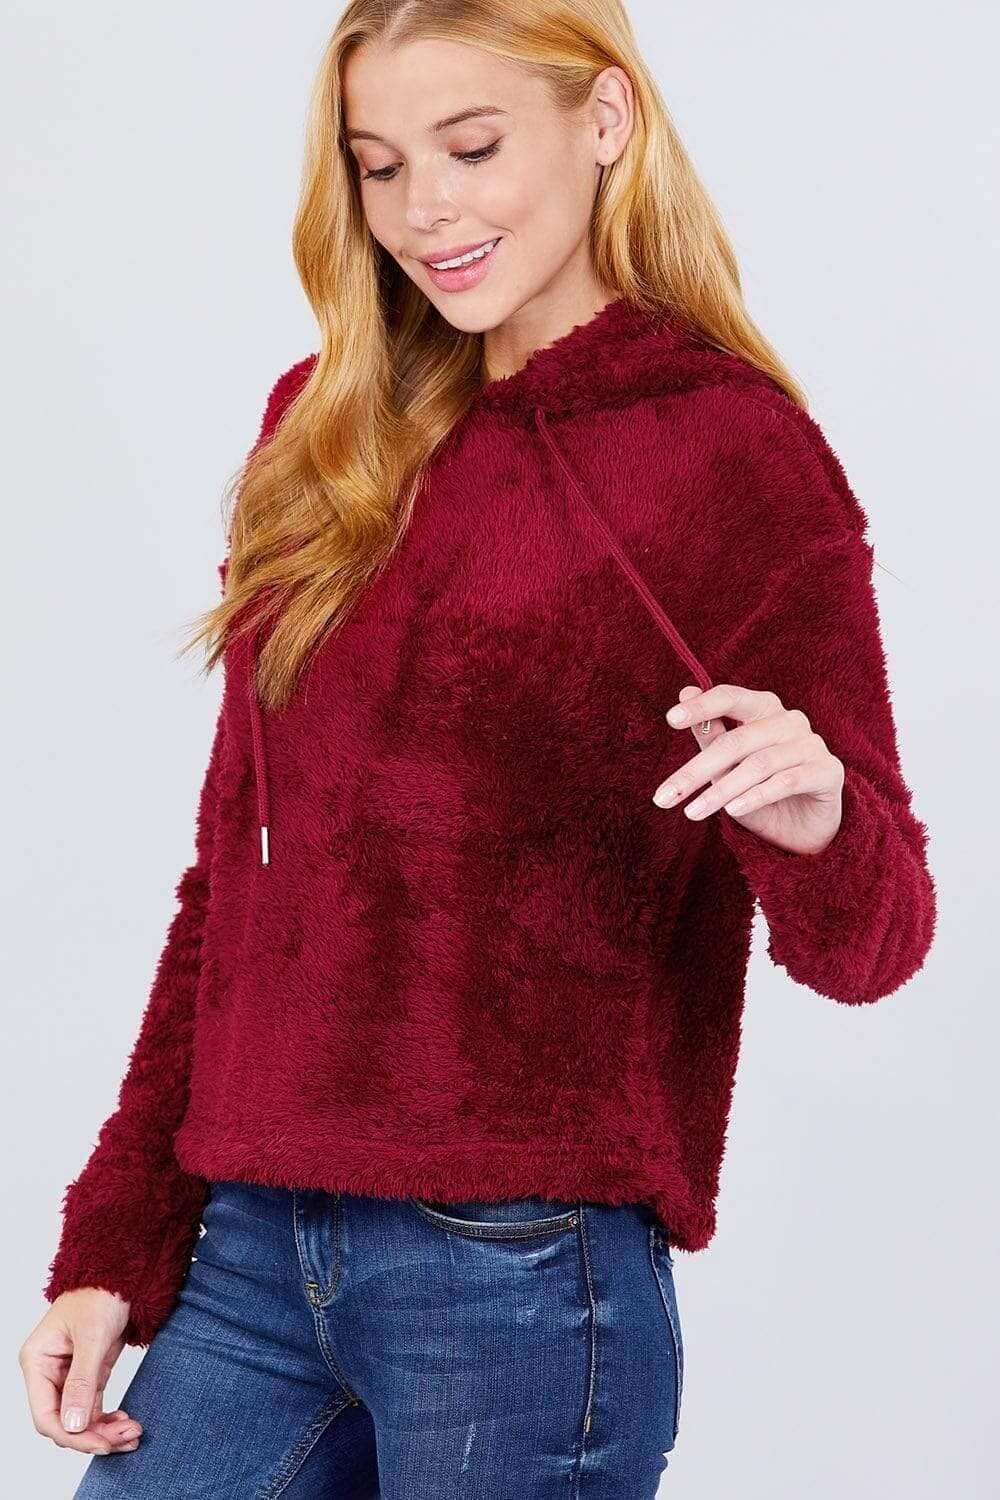 Burgundy Long Sleeve Faux Fur Sweater - Shopping Therapy, LLC Sweater